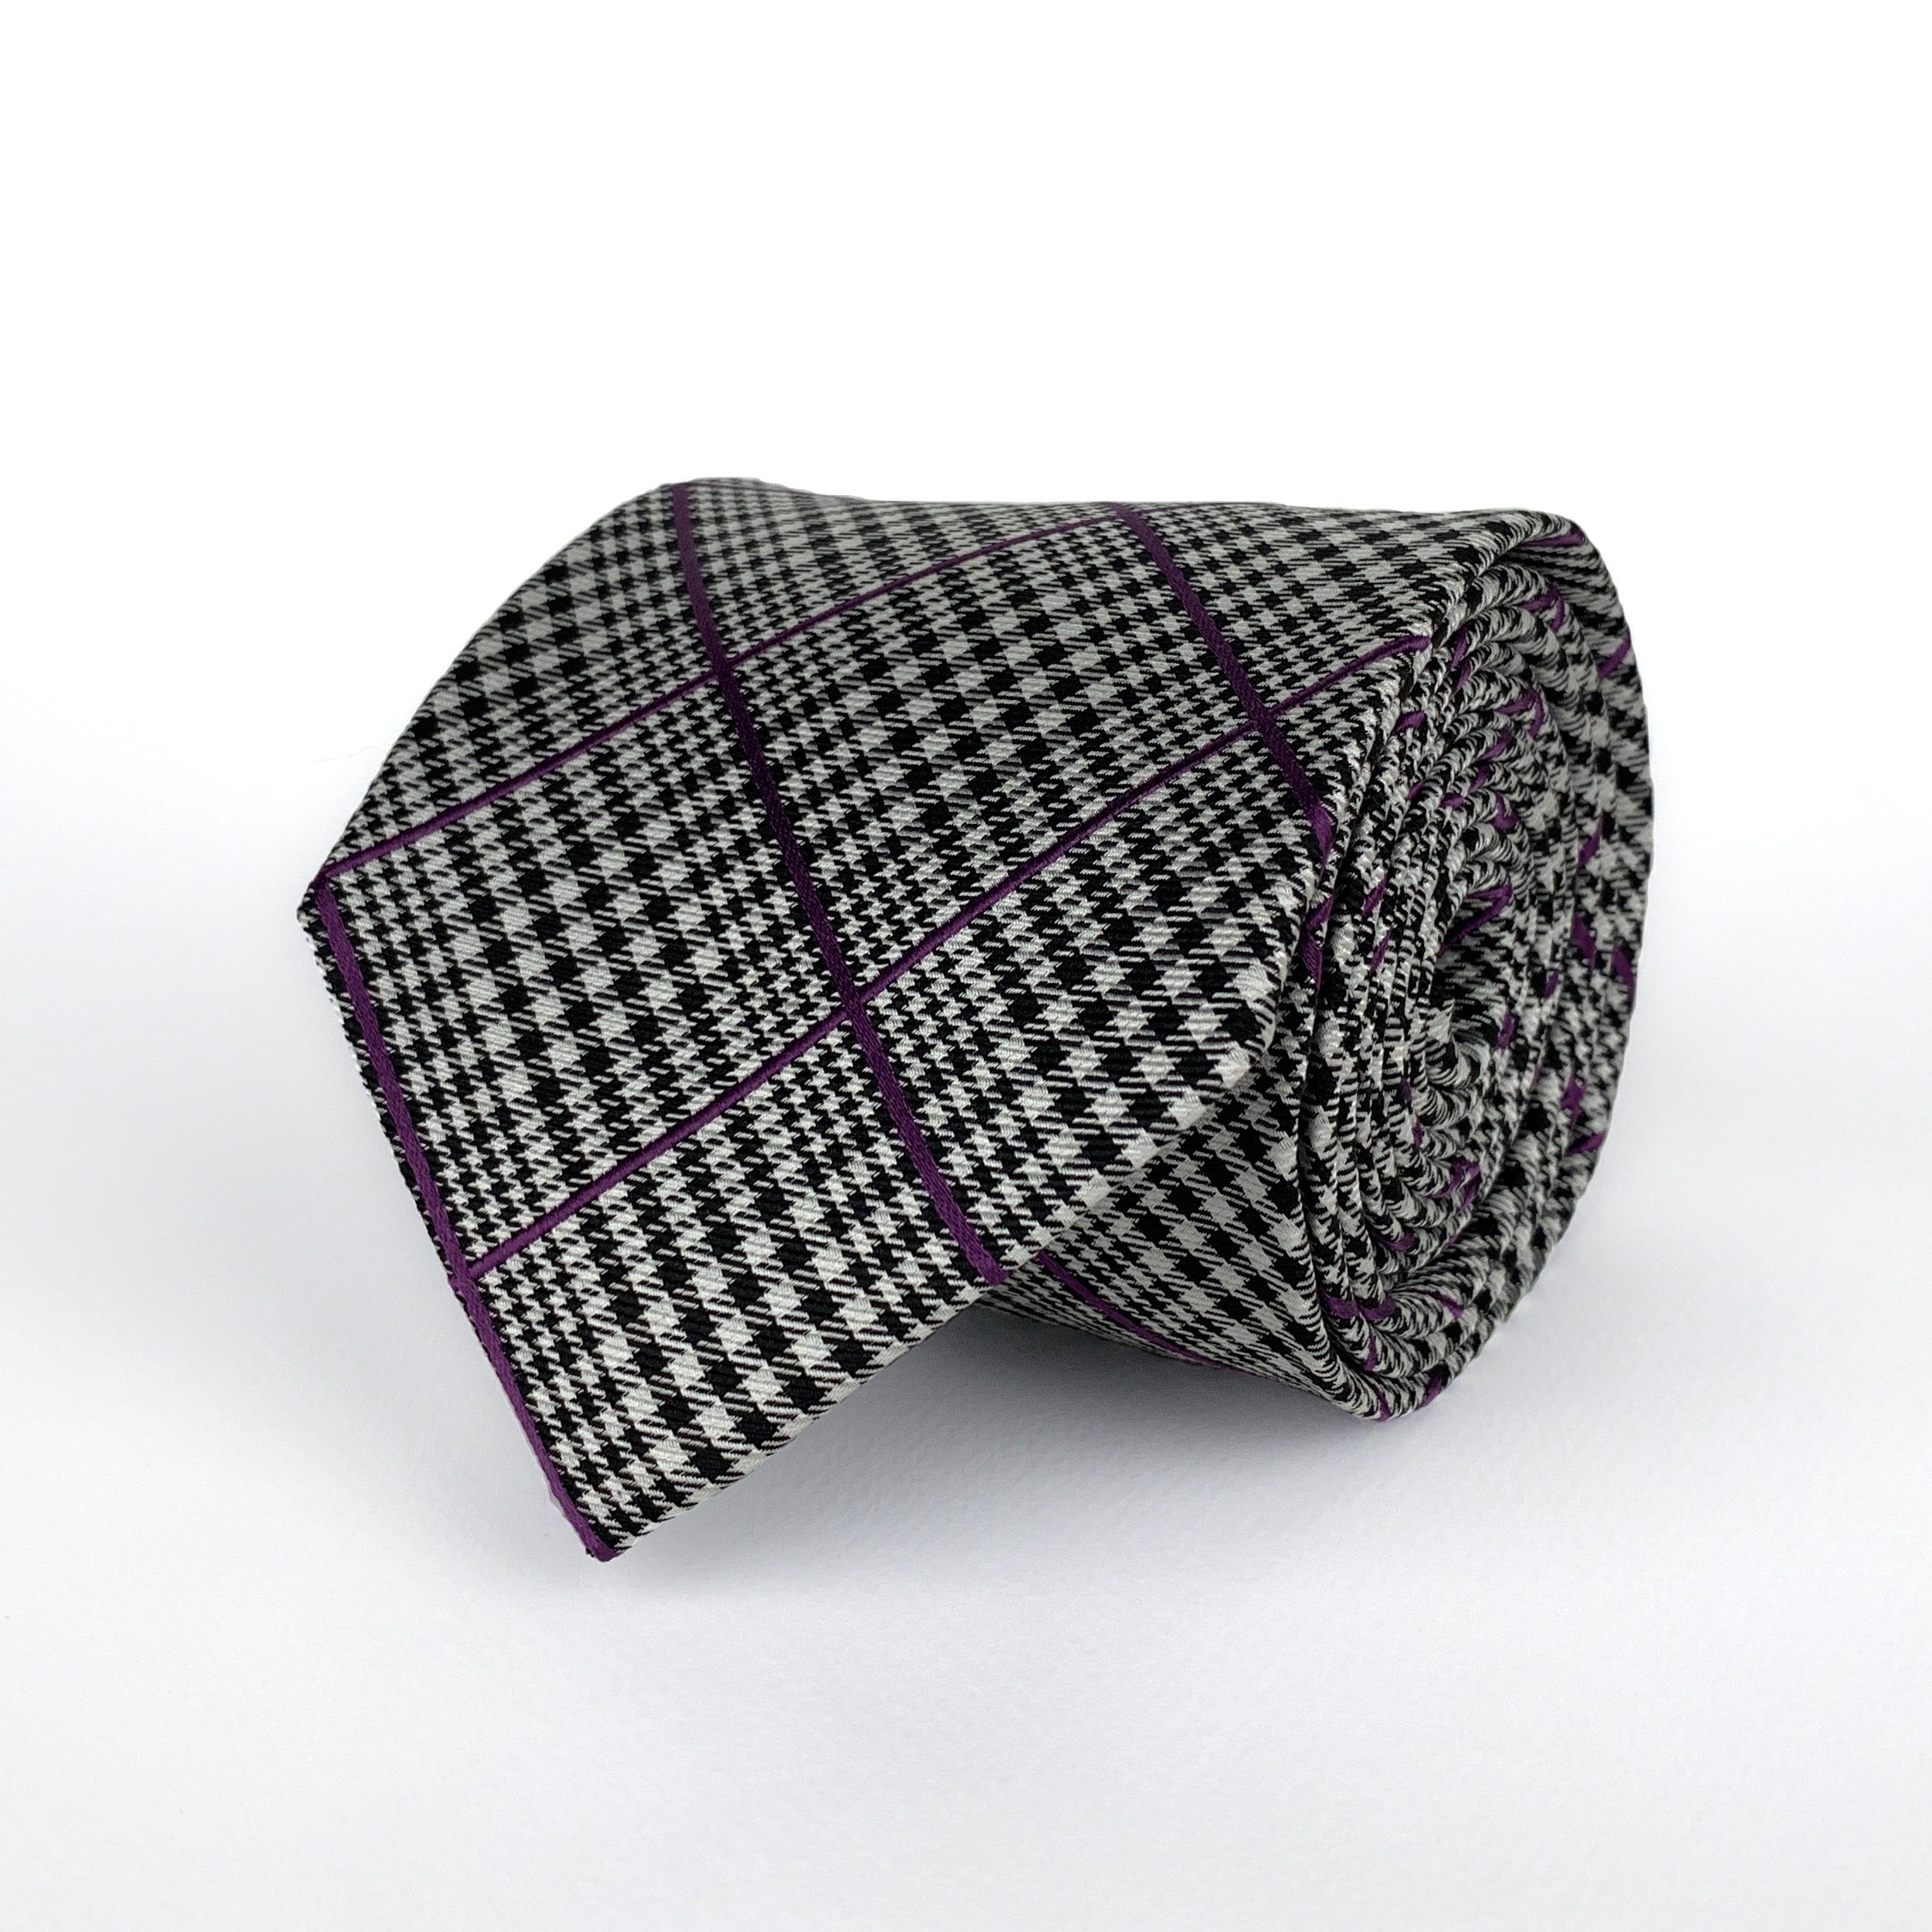 Prince of Wales Check, also known as Glen Plaid, silk twill tie in black and white with woven detailing in a purple hue rolled and placed on a white background